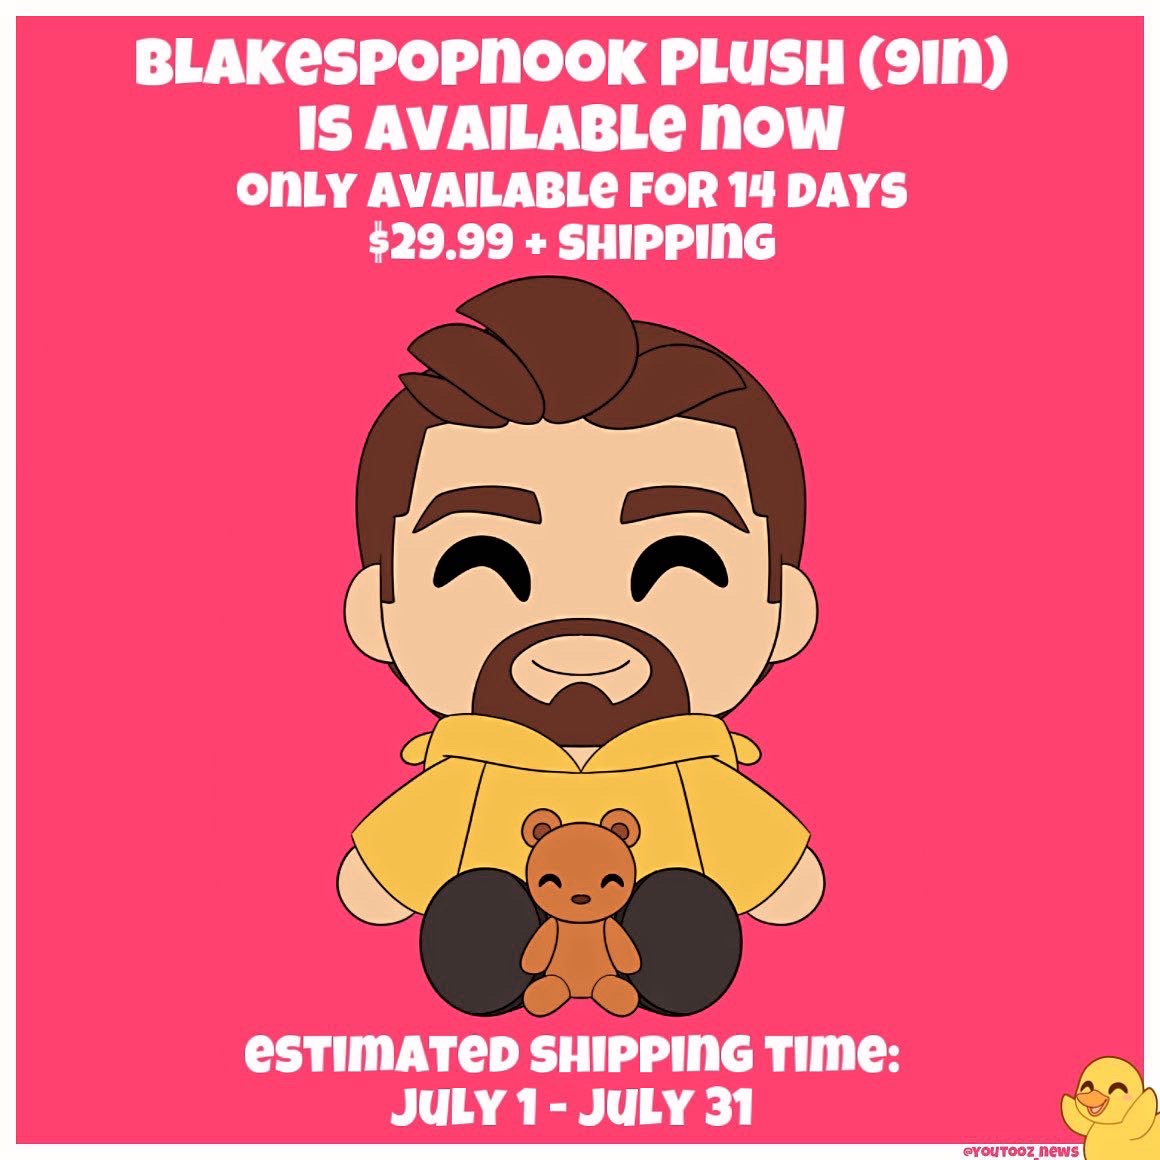 Josh Strife Hayes & Blakespopnook plush are available now!